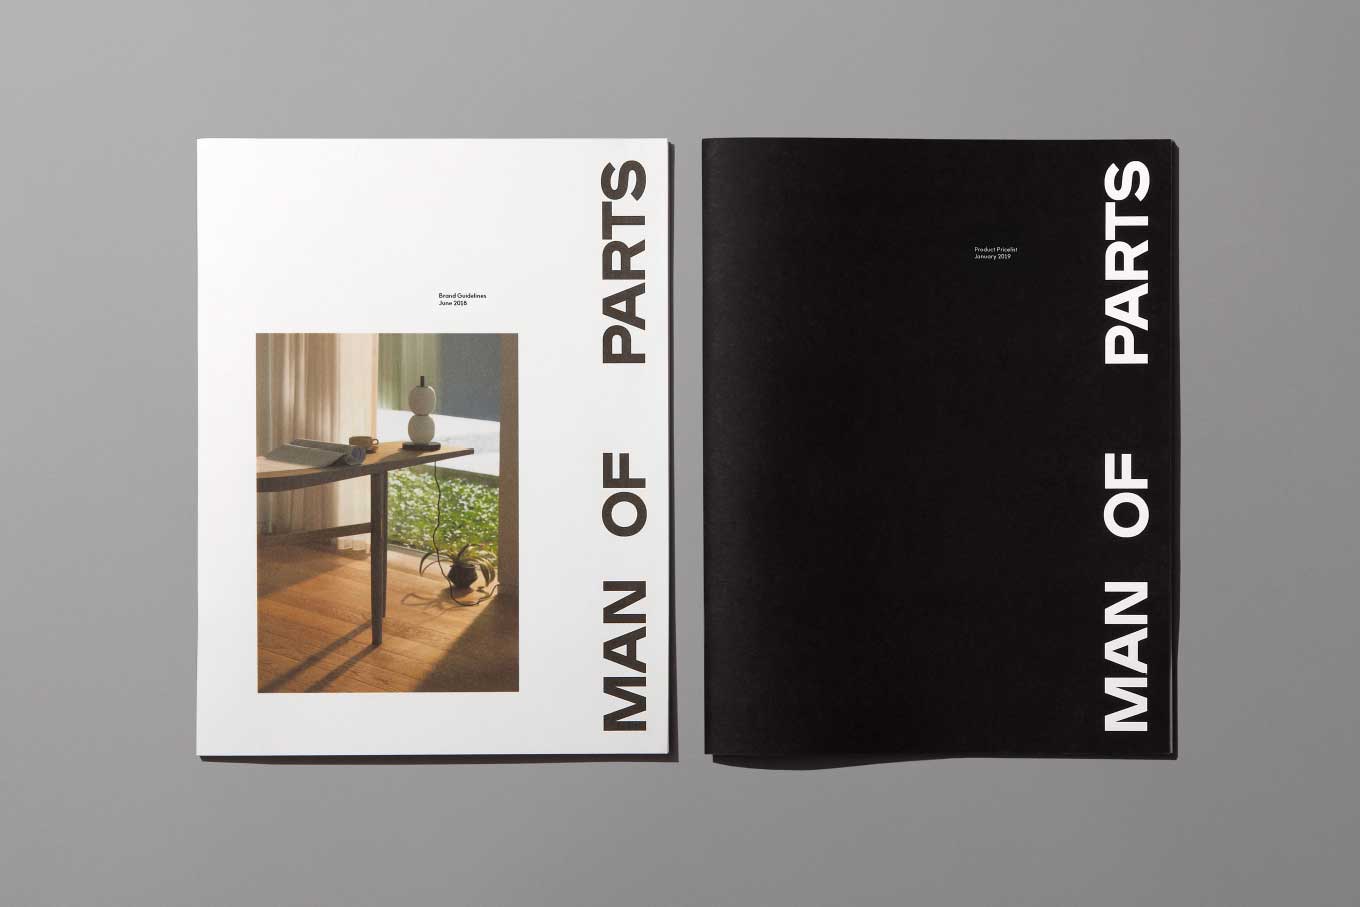 Man of Parts catalog front and back covers